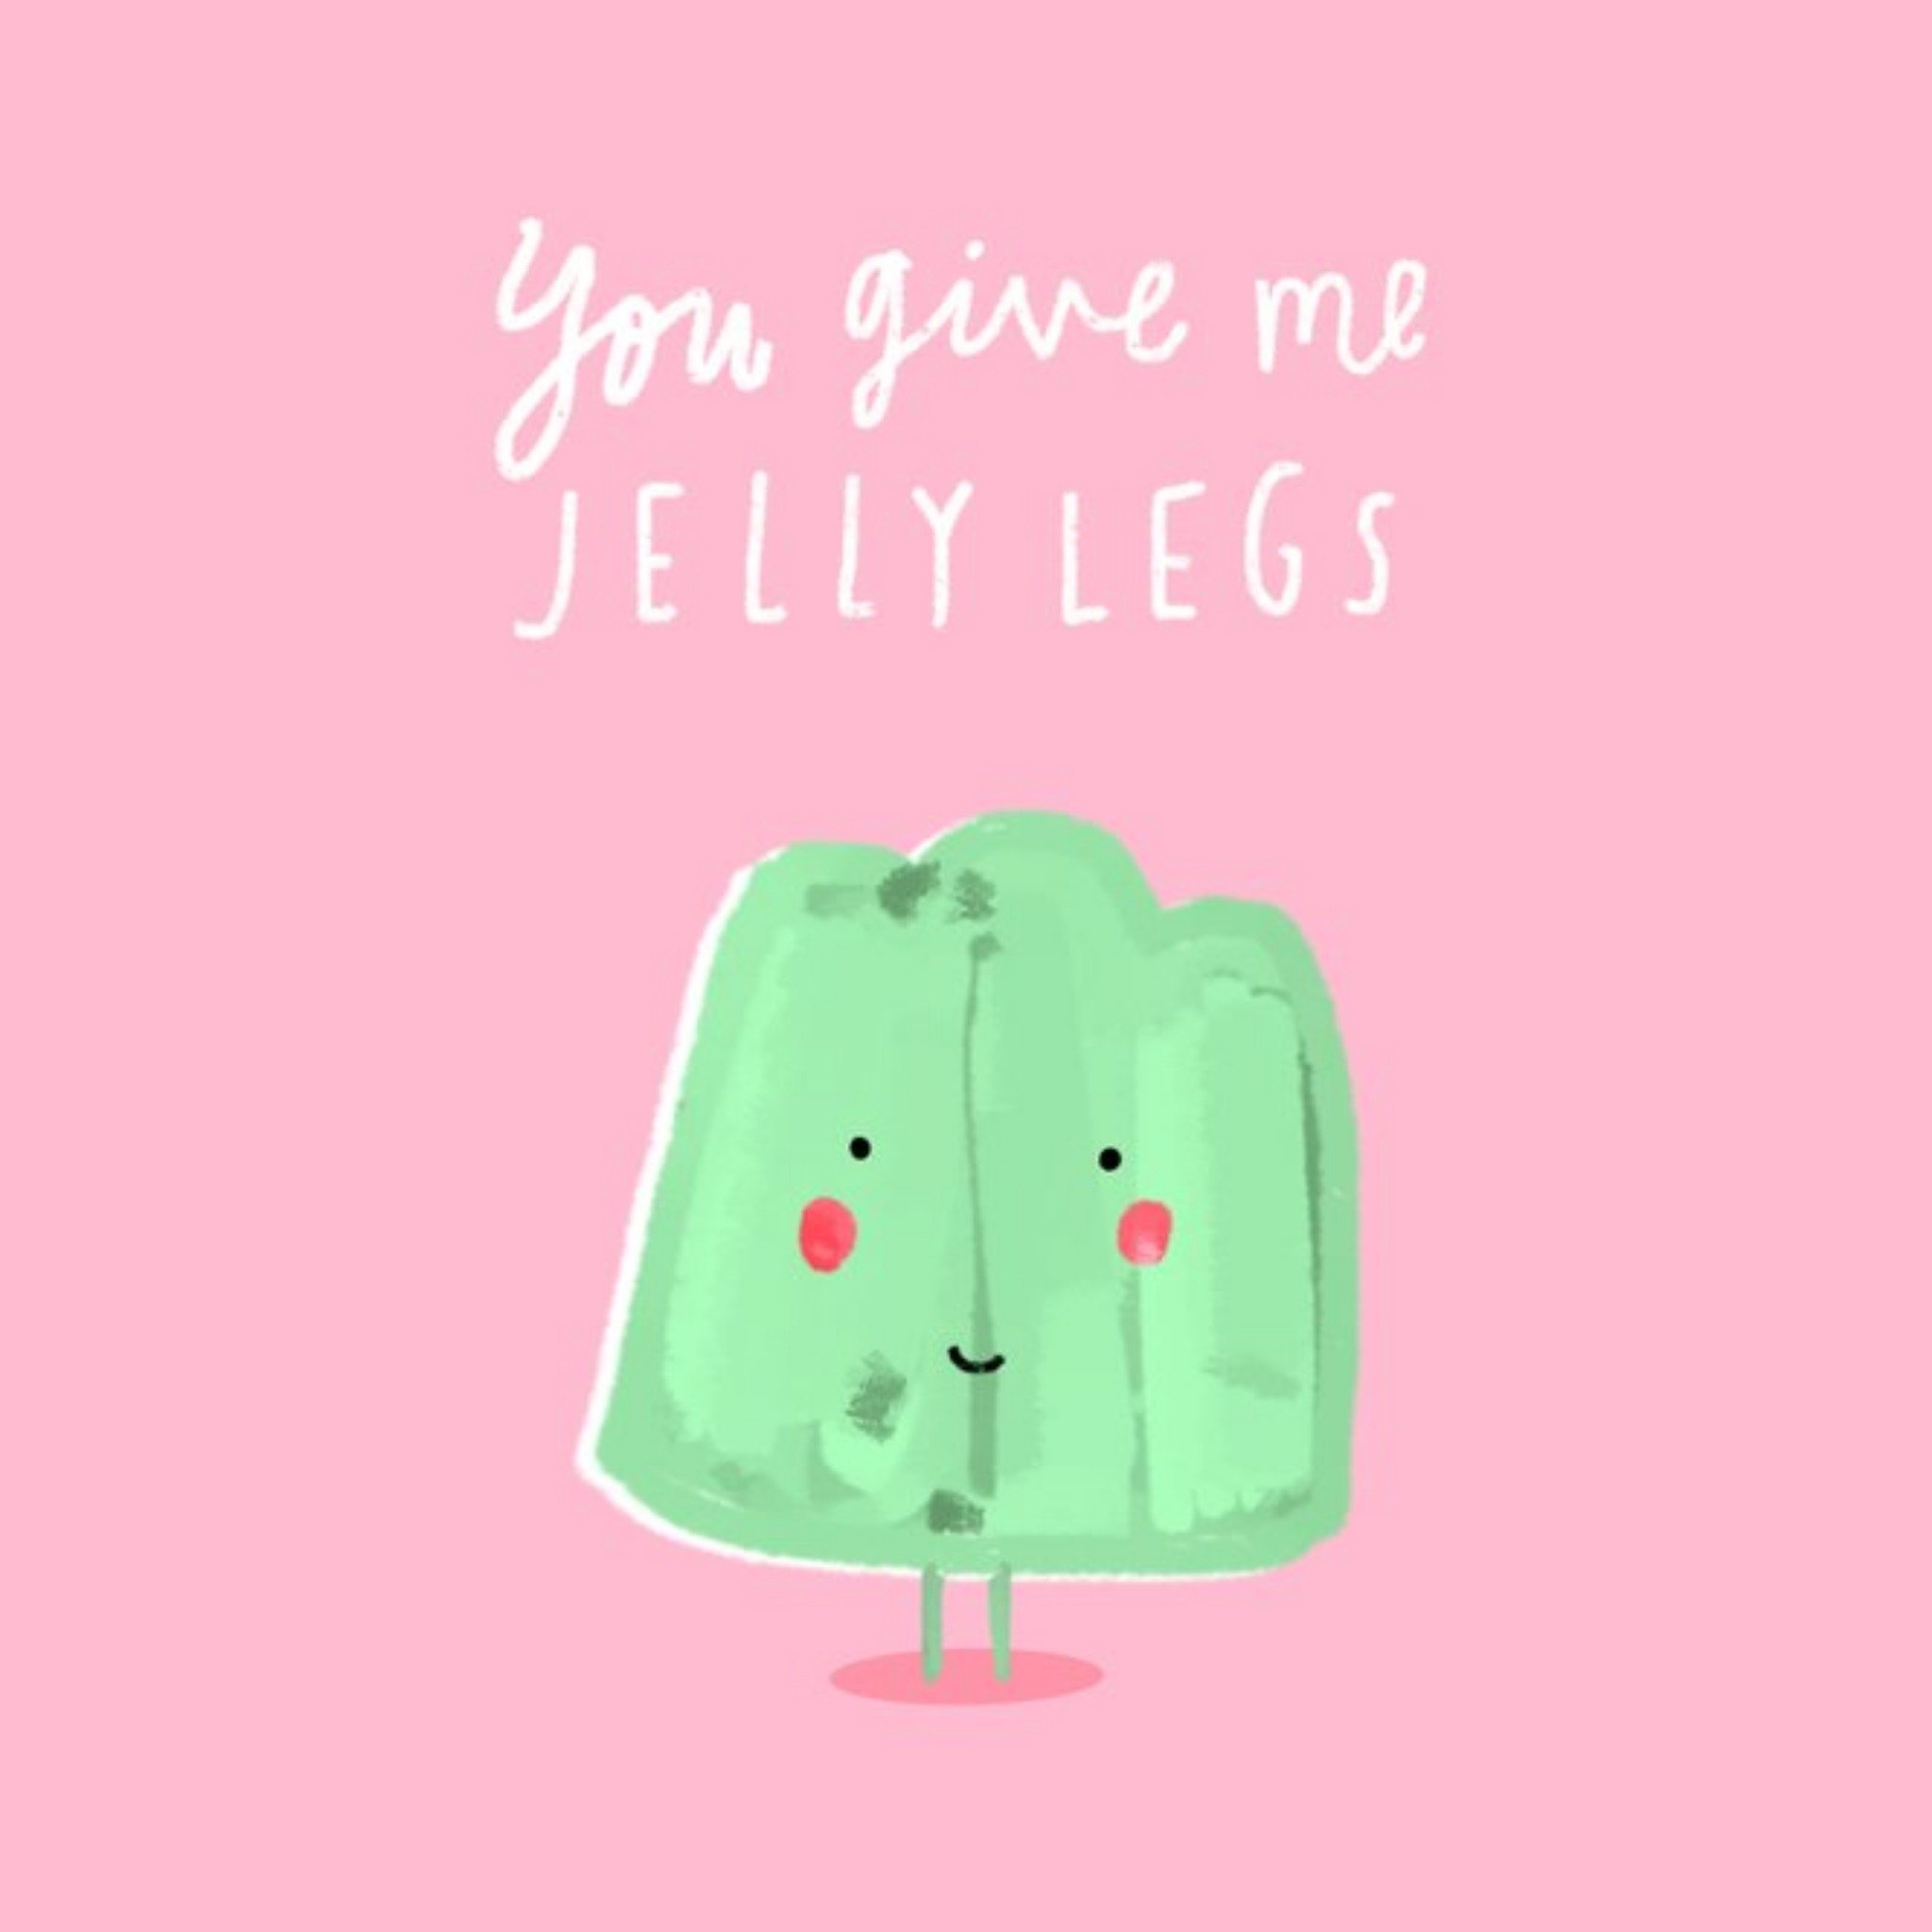 Moonpig You Give Me Jelly Legs Card, Large